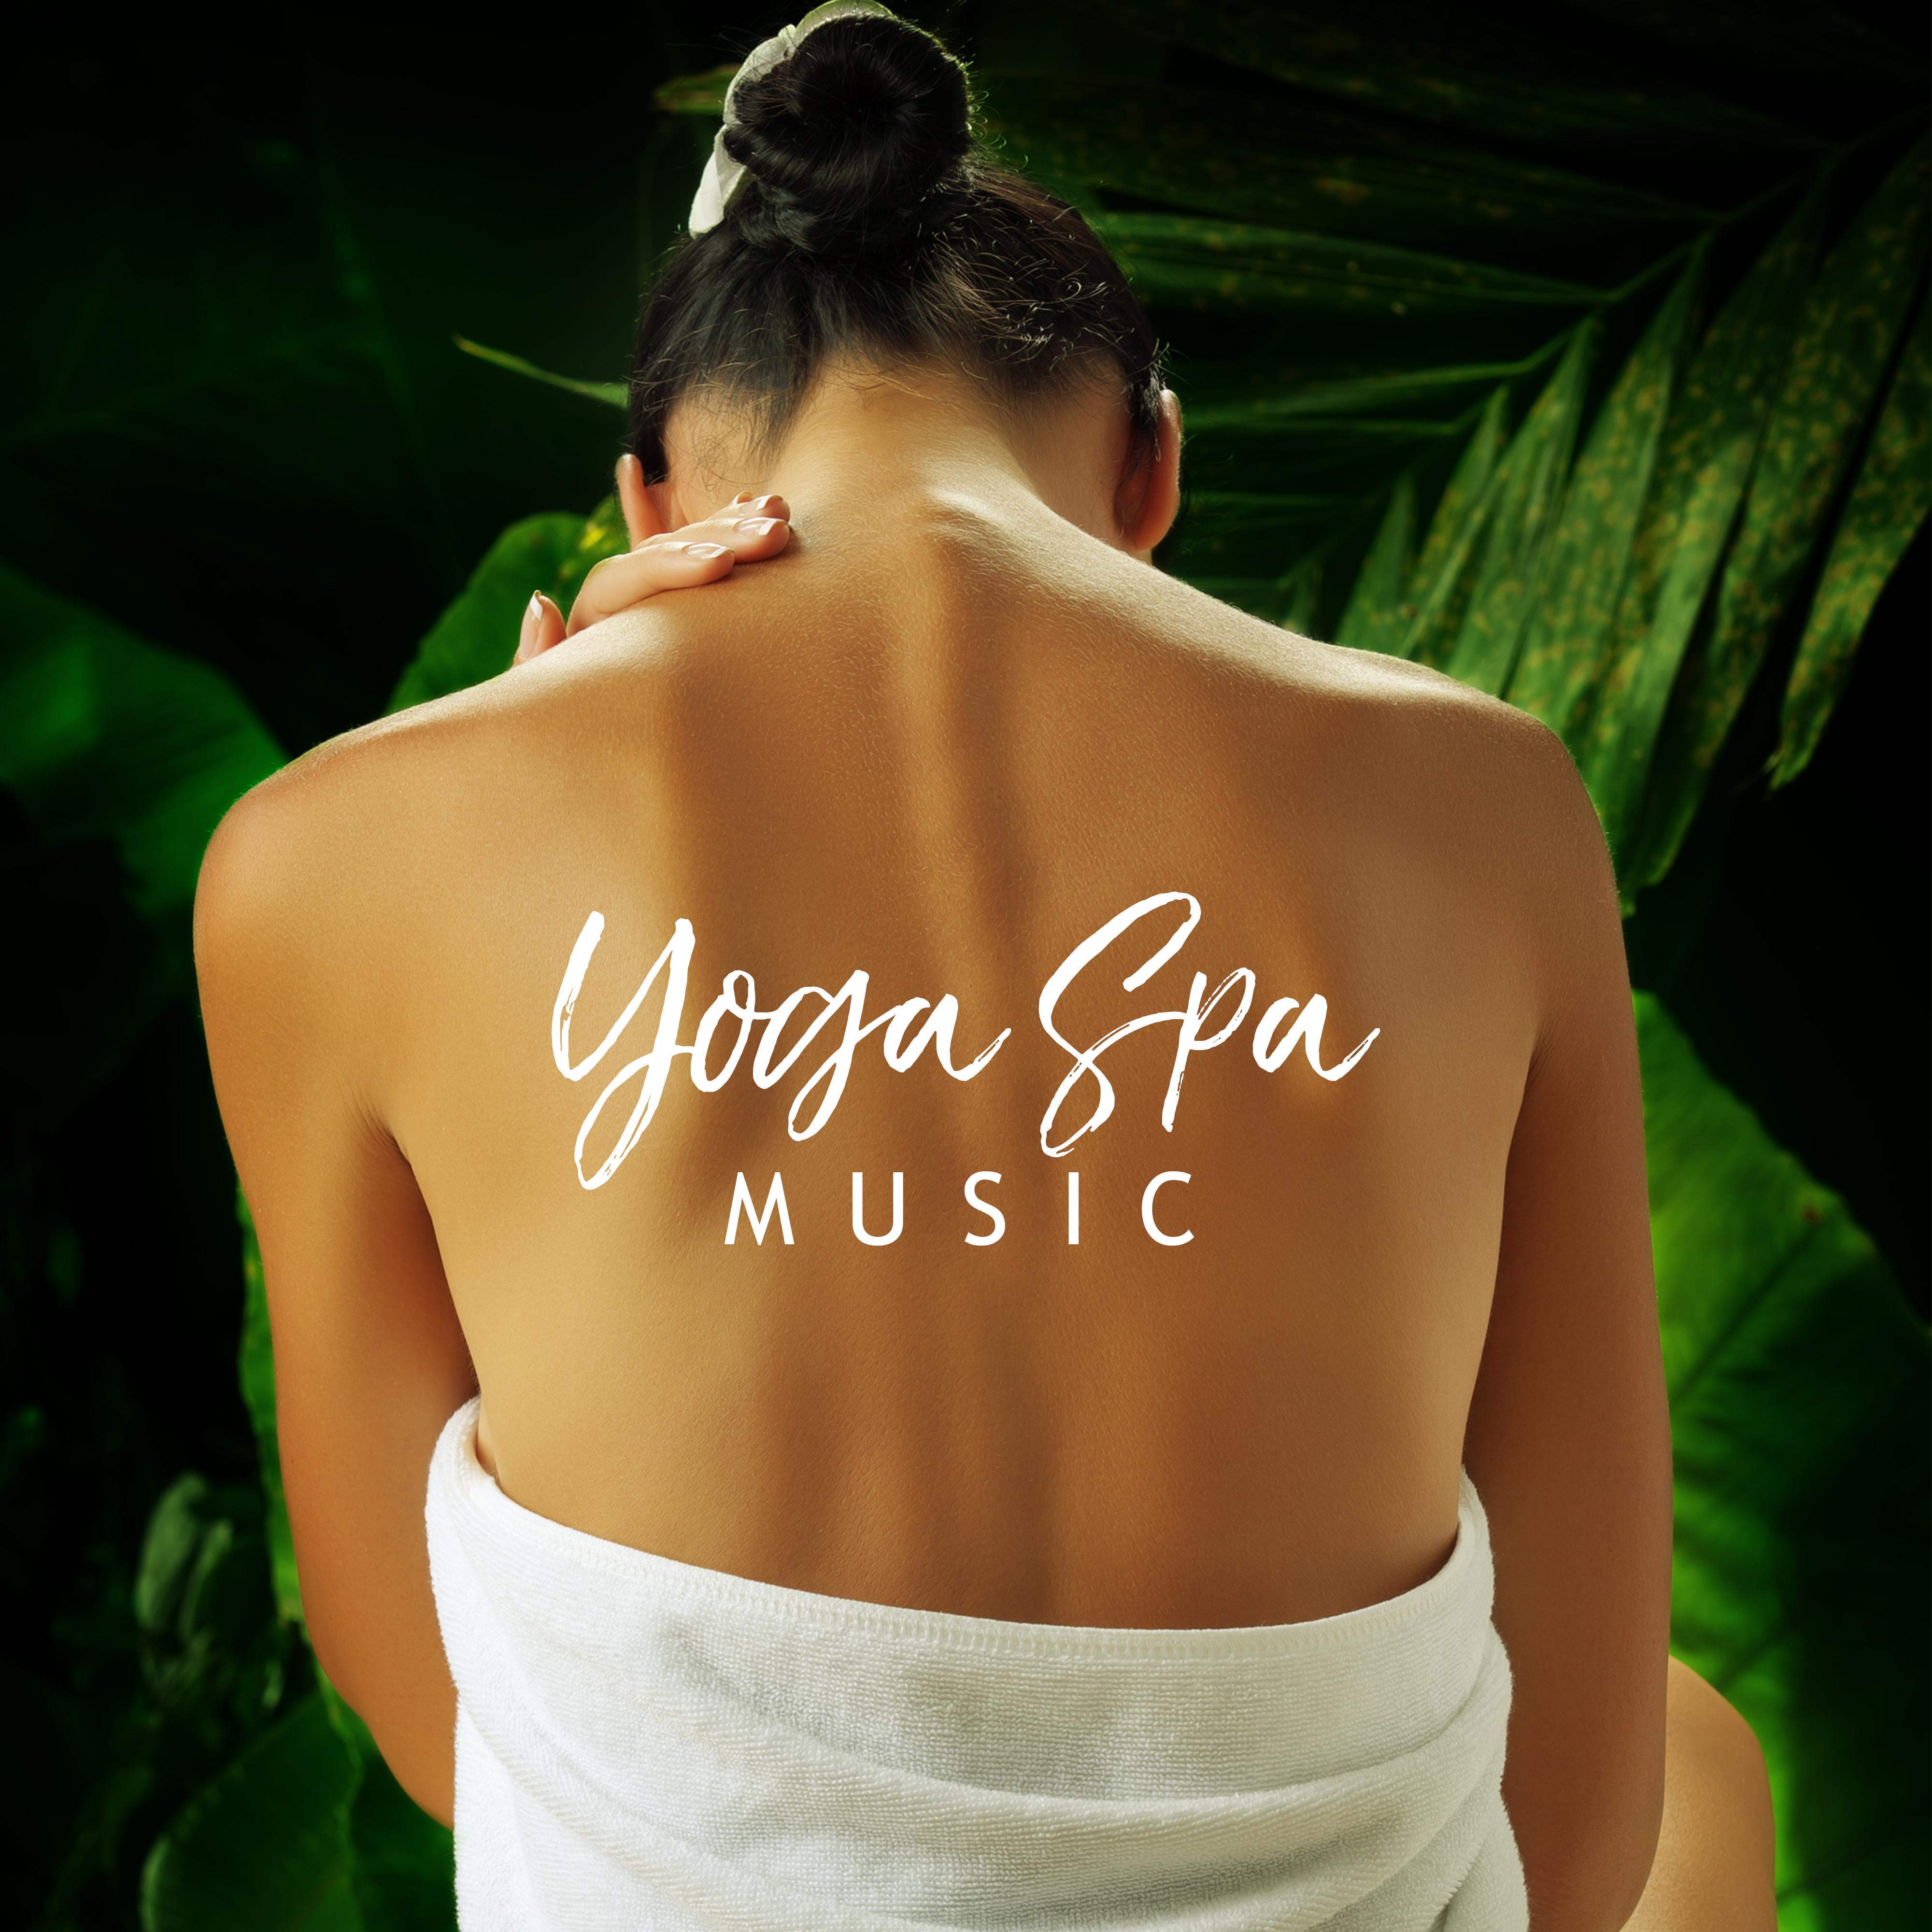 Yoga Spa Music: Music Therapy, Calming Spa, Massage Music for Relaxation, Zen, Lounge, Inner Harmony, Luxury Spa Tunes